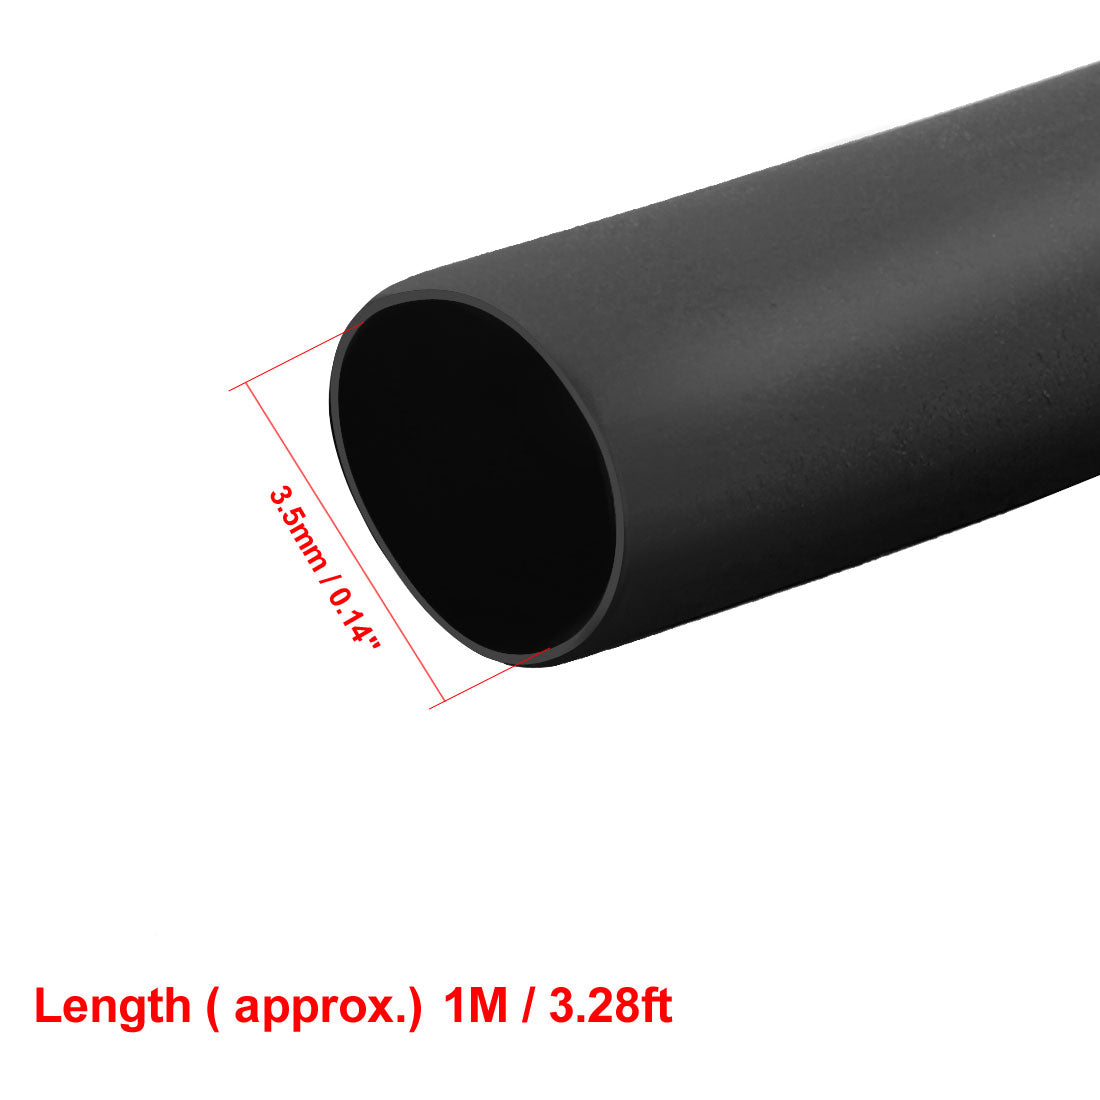 uxcell Uxcell Heat Shrink Tube 2:1 Electrical Insulation Tube Wire Cable Tubing Sleeving Wrap Black 3.5mm Diameter 1m Long